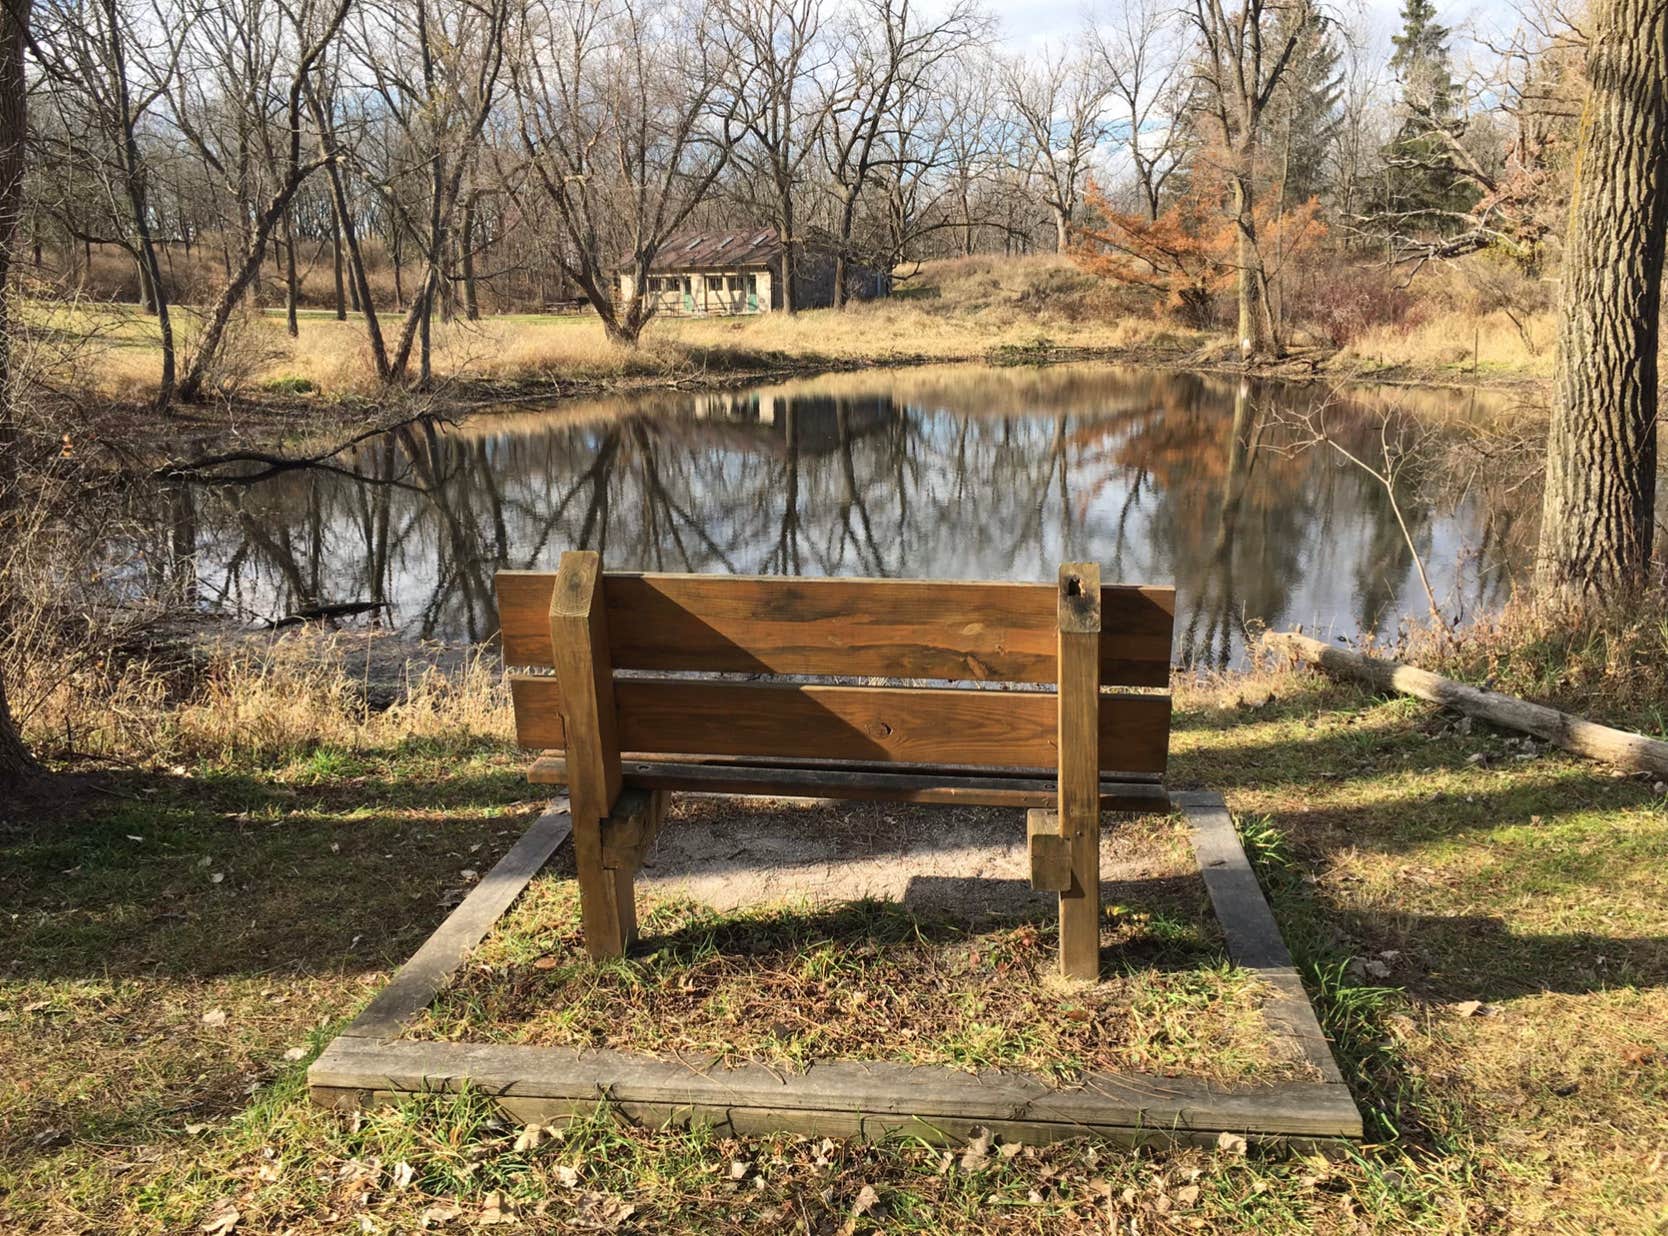 Picnic Areas and Shelters, Kettle Moraine State Forest – Pike Lake Unit